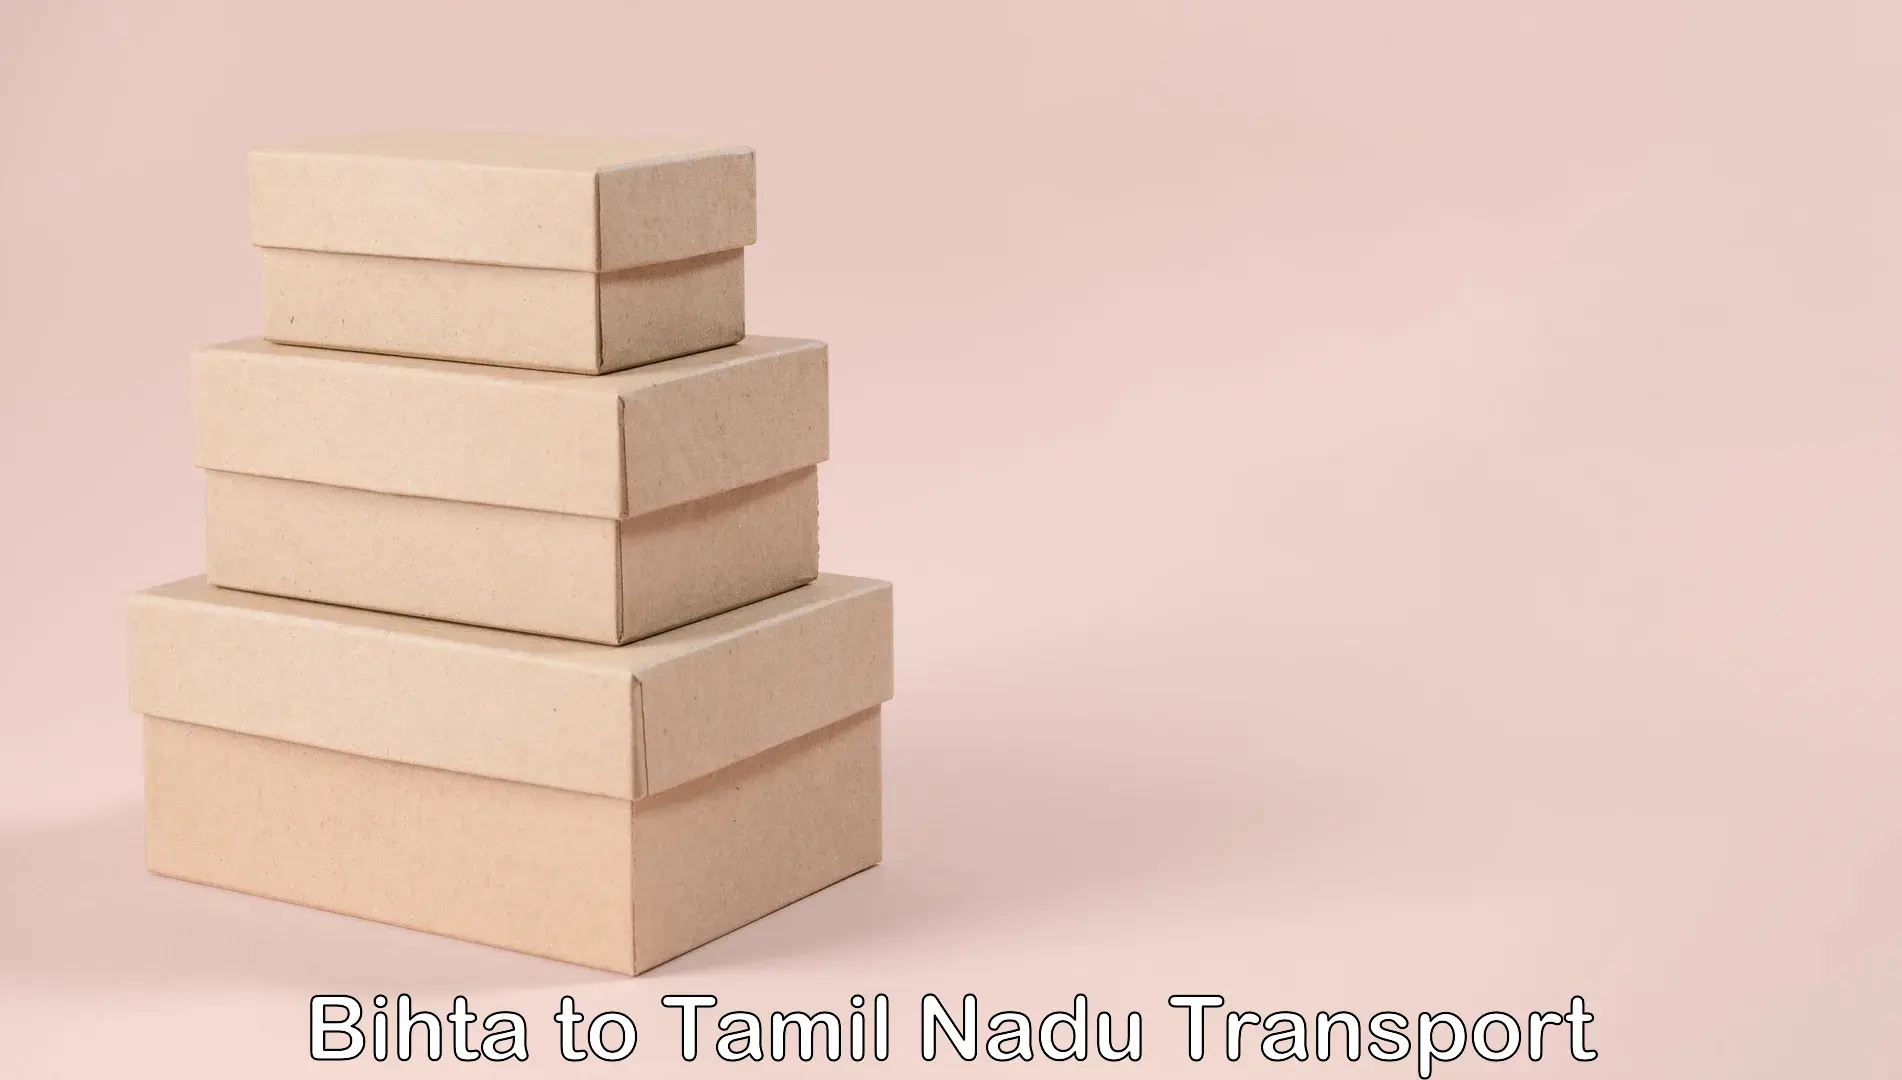 Daily parcel service transport in Bihta to Nagapattinam